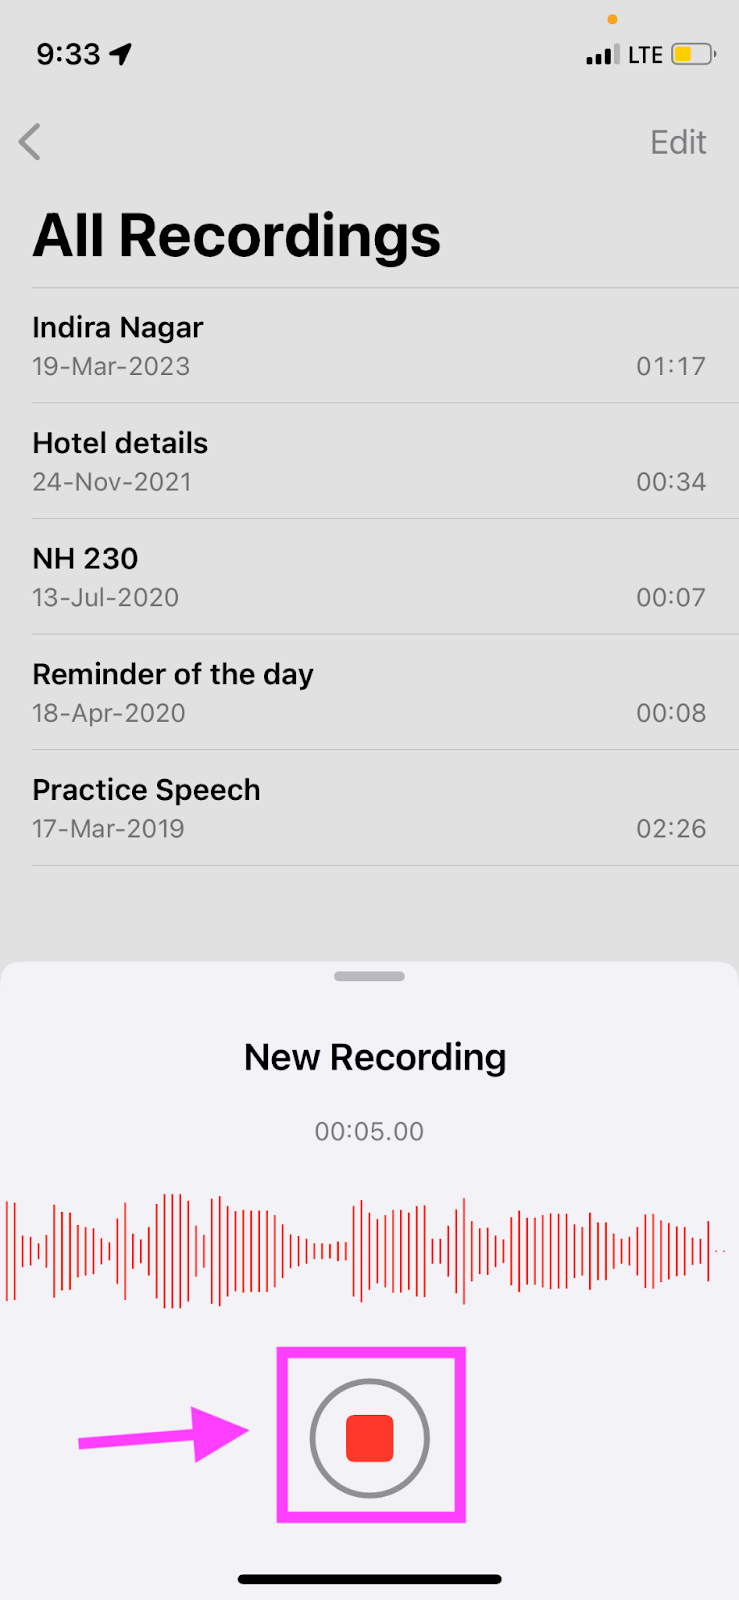 How to record a voice note on iPhone - Stop recording the voice note